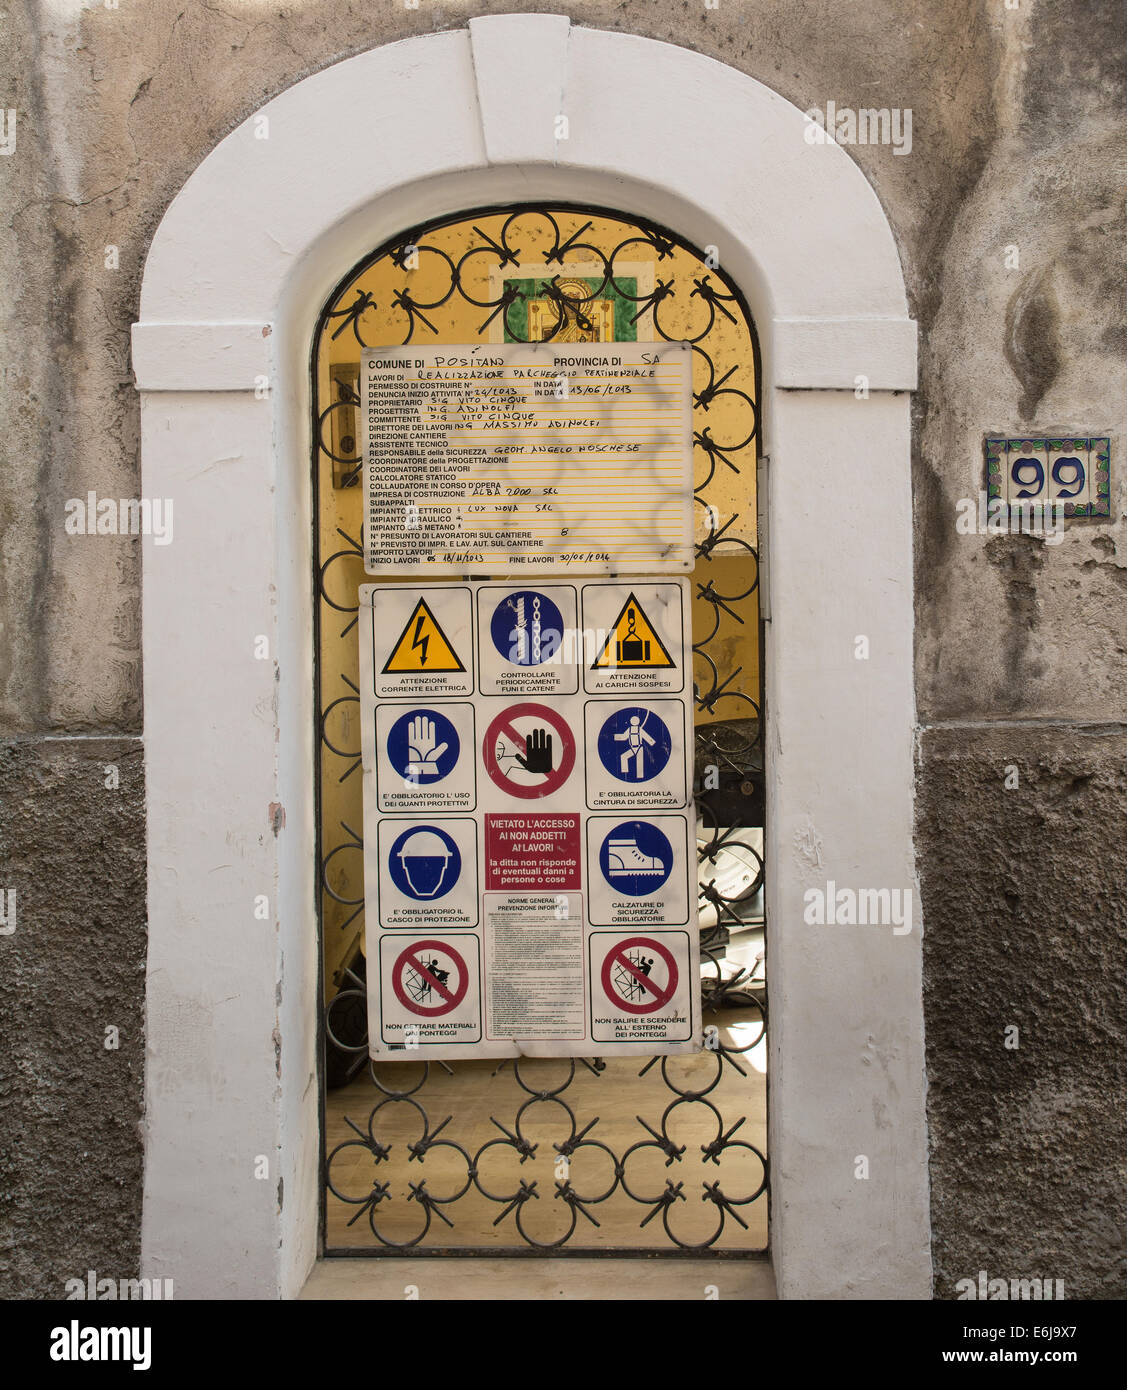 Entrance to a construction site in Italy, with health and safety signs in Italian. Stock Photo